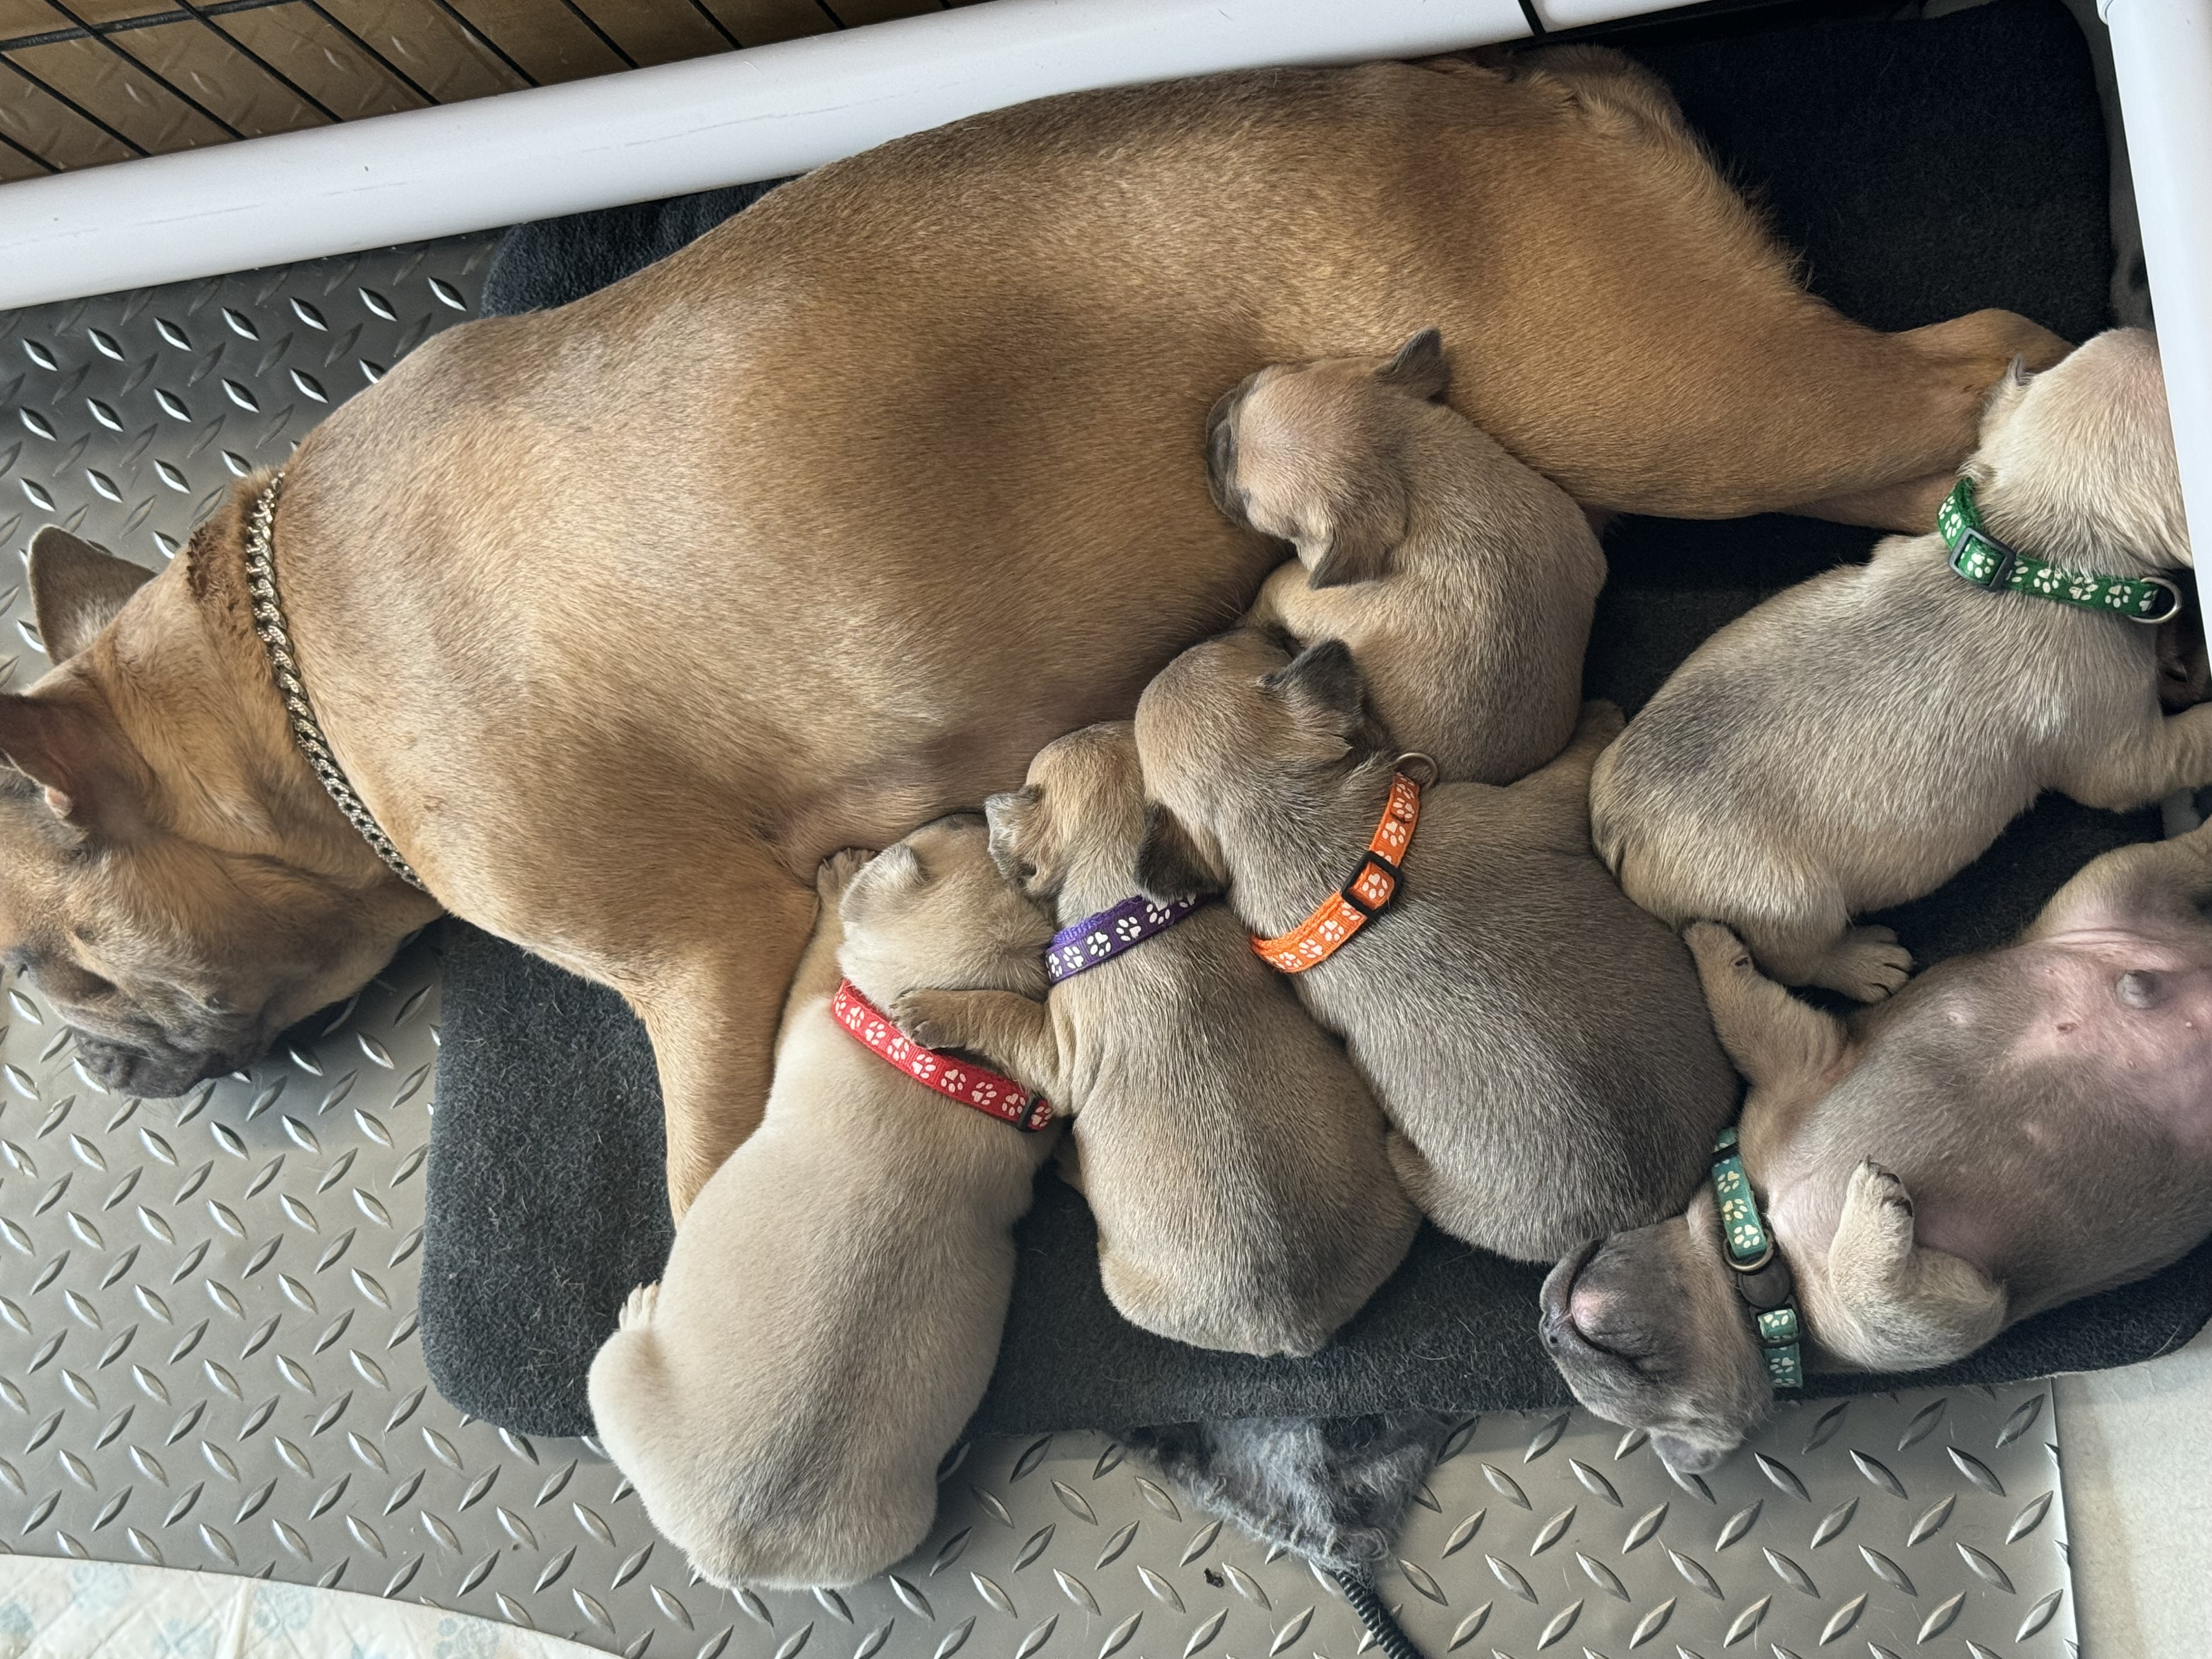 Mum and the 6 Puppies